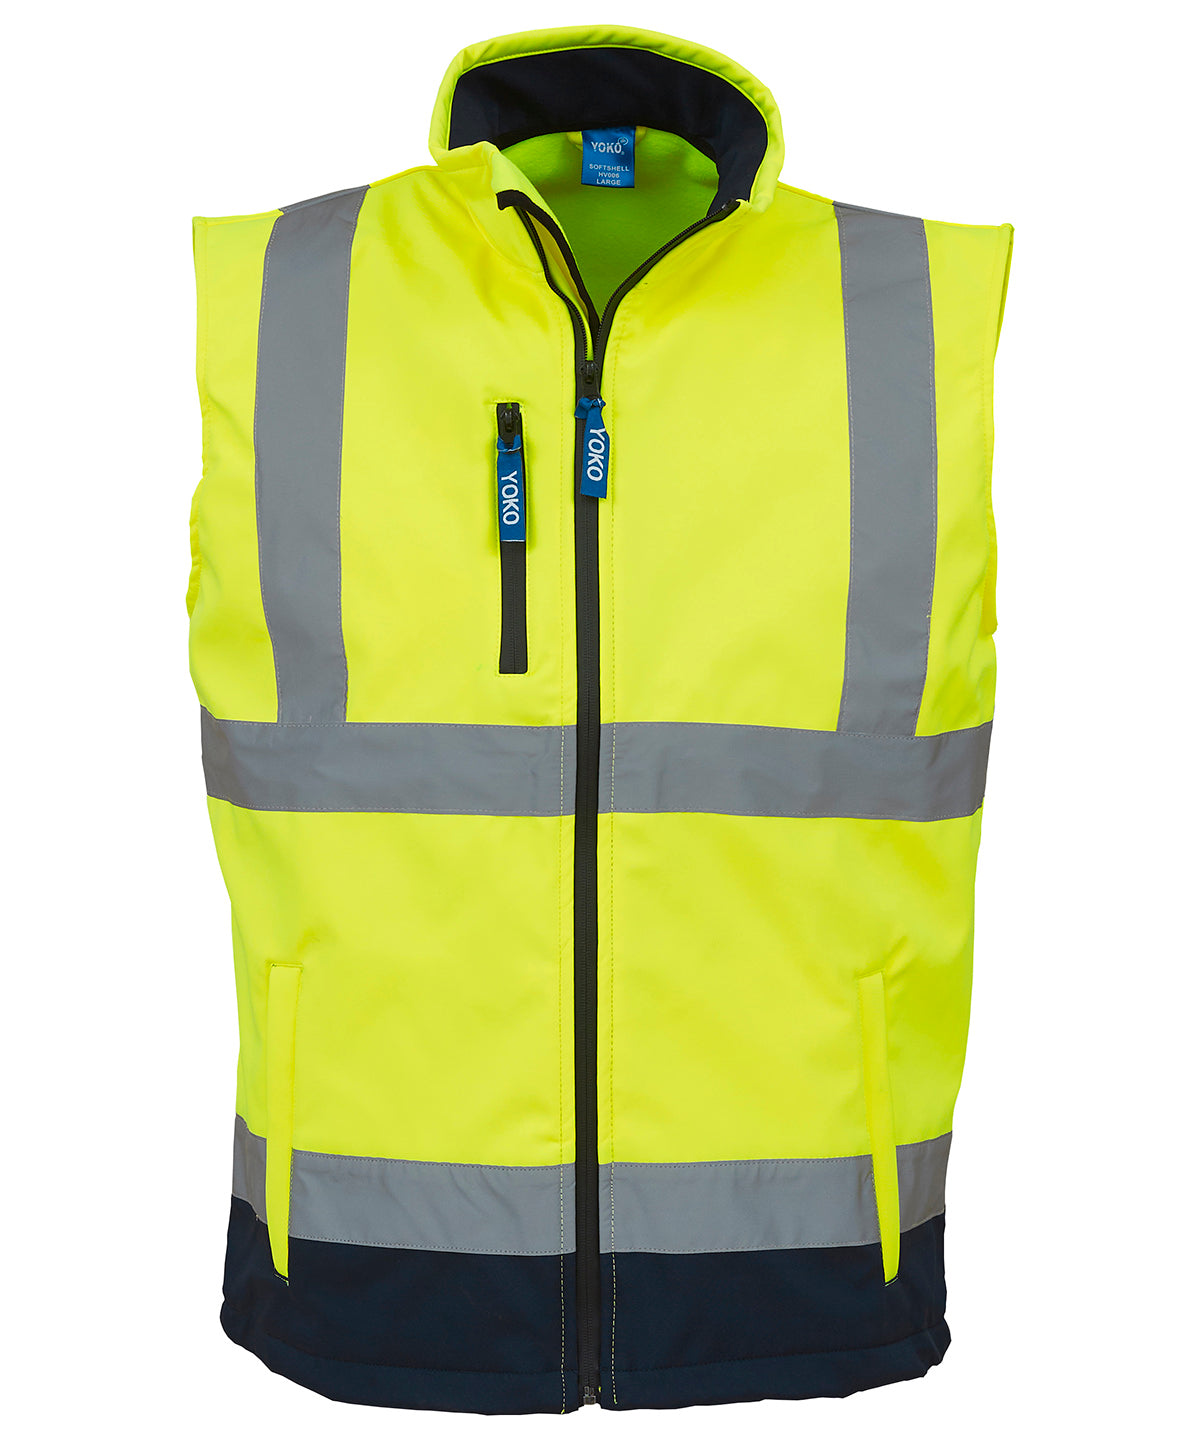 Yellow/Navy - Hi-vis softshell gilet (HV006) Body Warmers Yoko Gilets and Bodywarmers, Jackets & Coats, Must Haves, Plus Sizes, Safetywear, Softshells, Workwear Schoolwear Centres